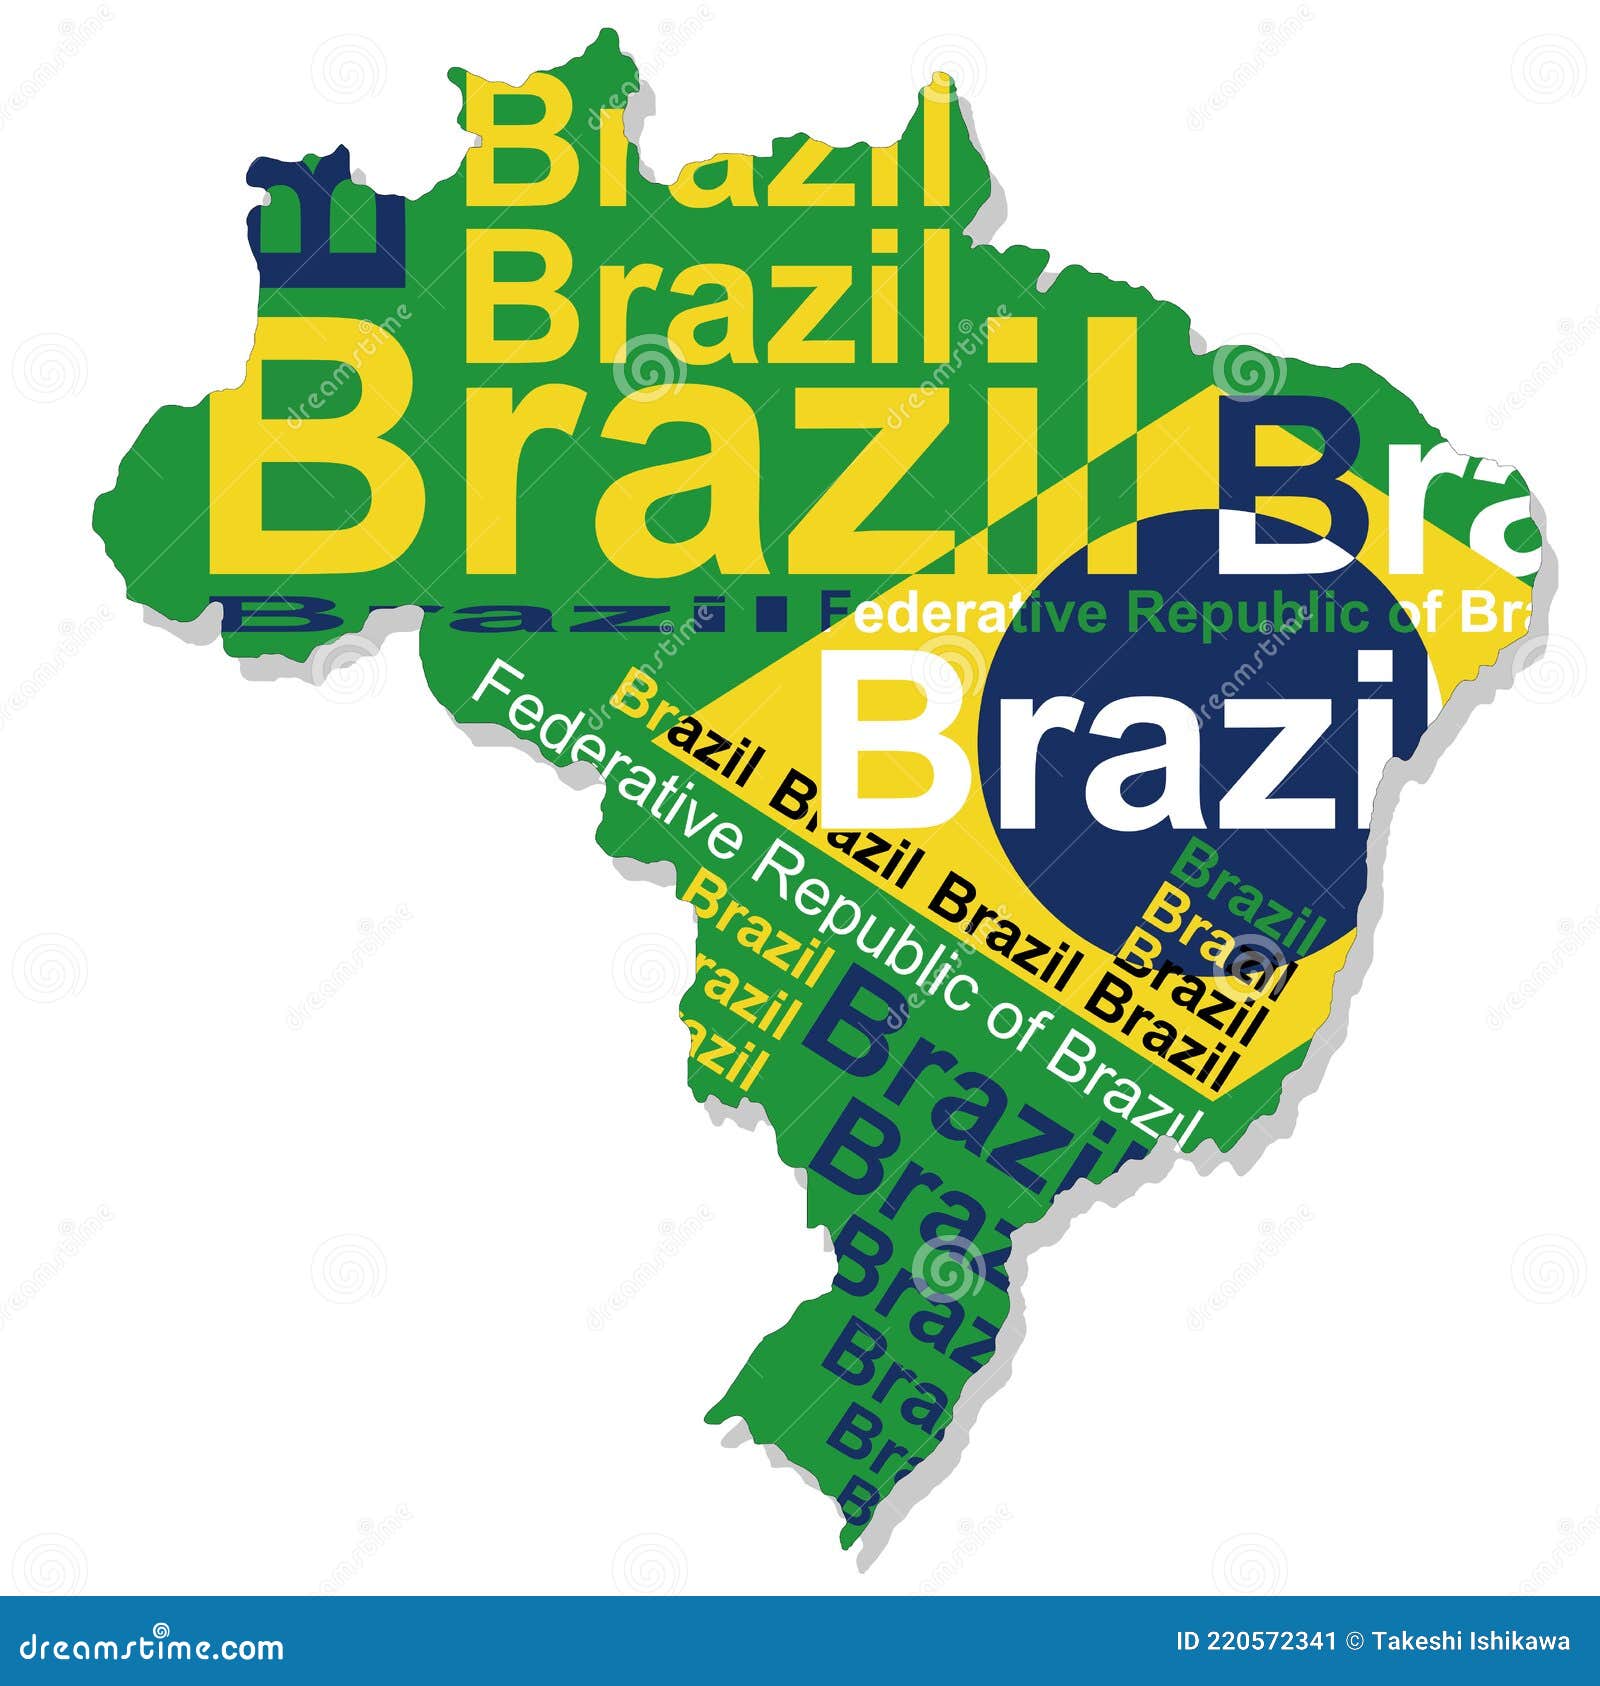 Map of Brazil Composed of the Shape of the Land, the Country Name